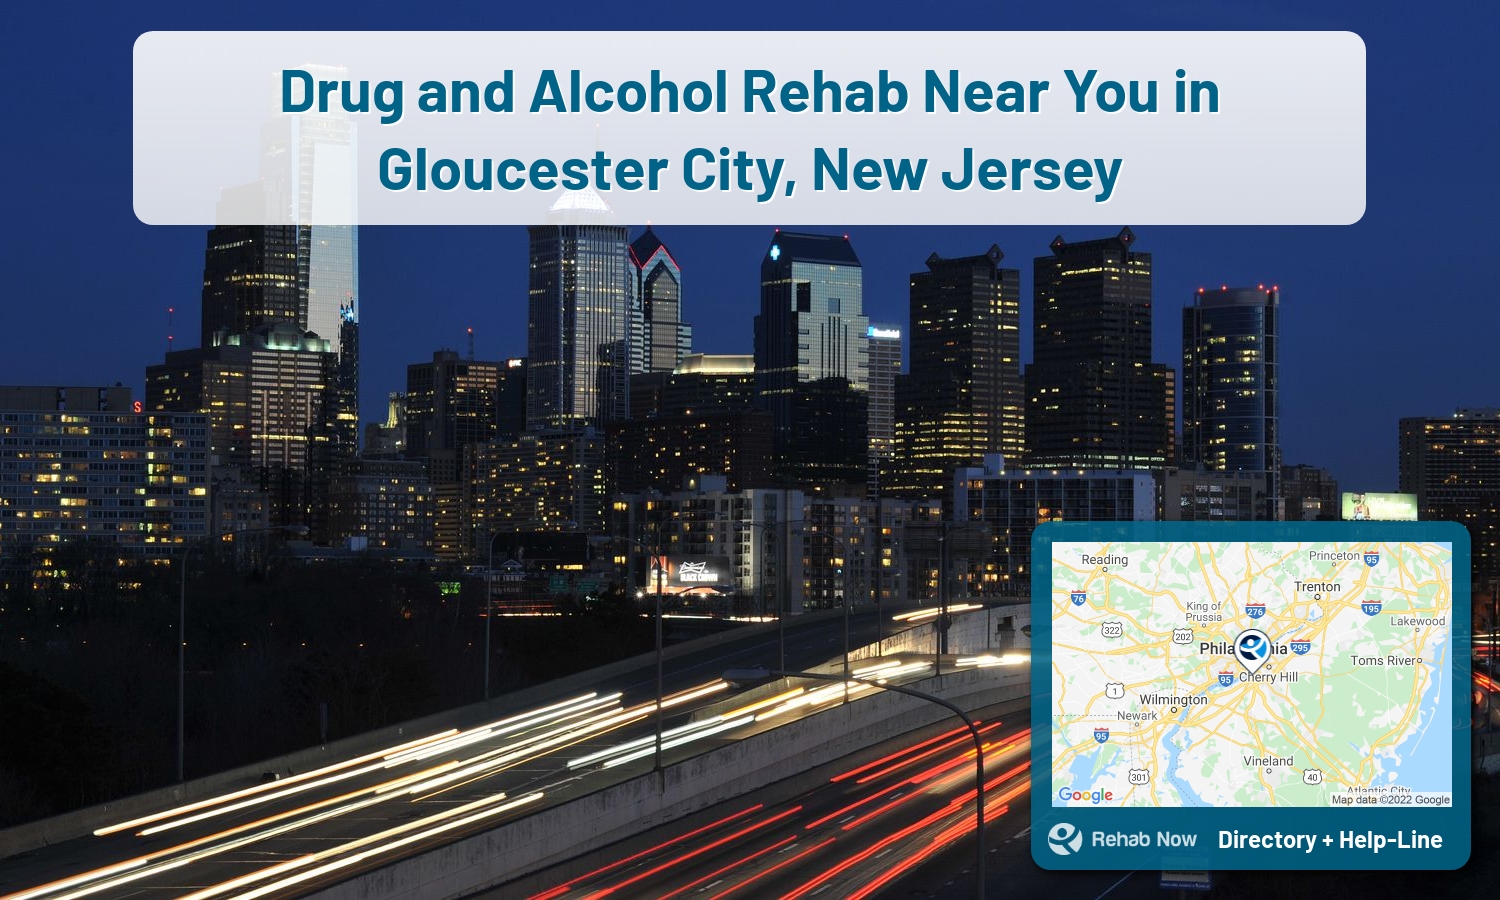 Drug rehab and alcohol treatment services near you in Gloucester City, New Jersey. Need help choosing a center? Call us, free.